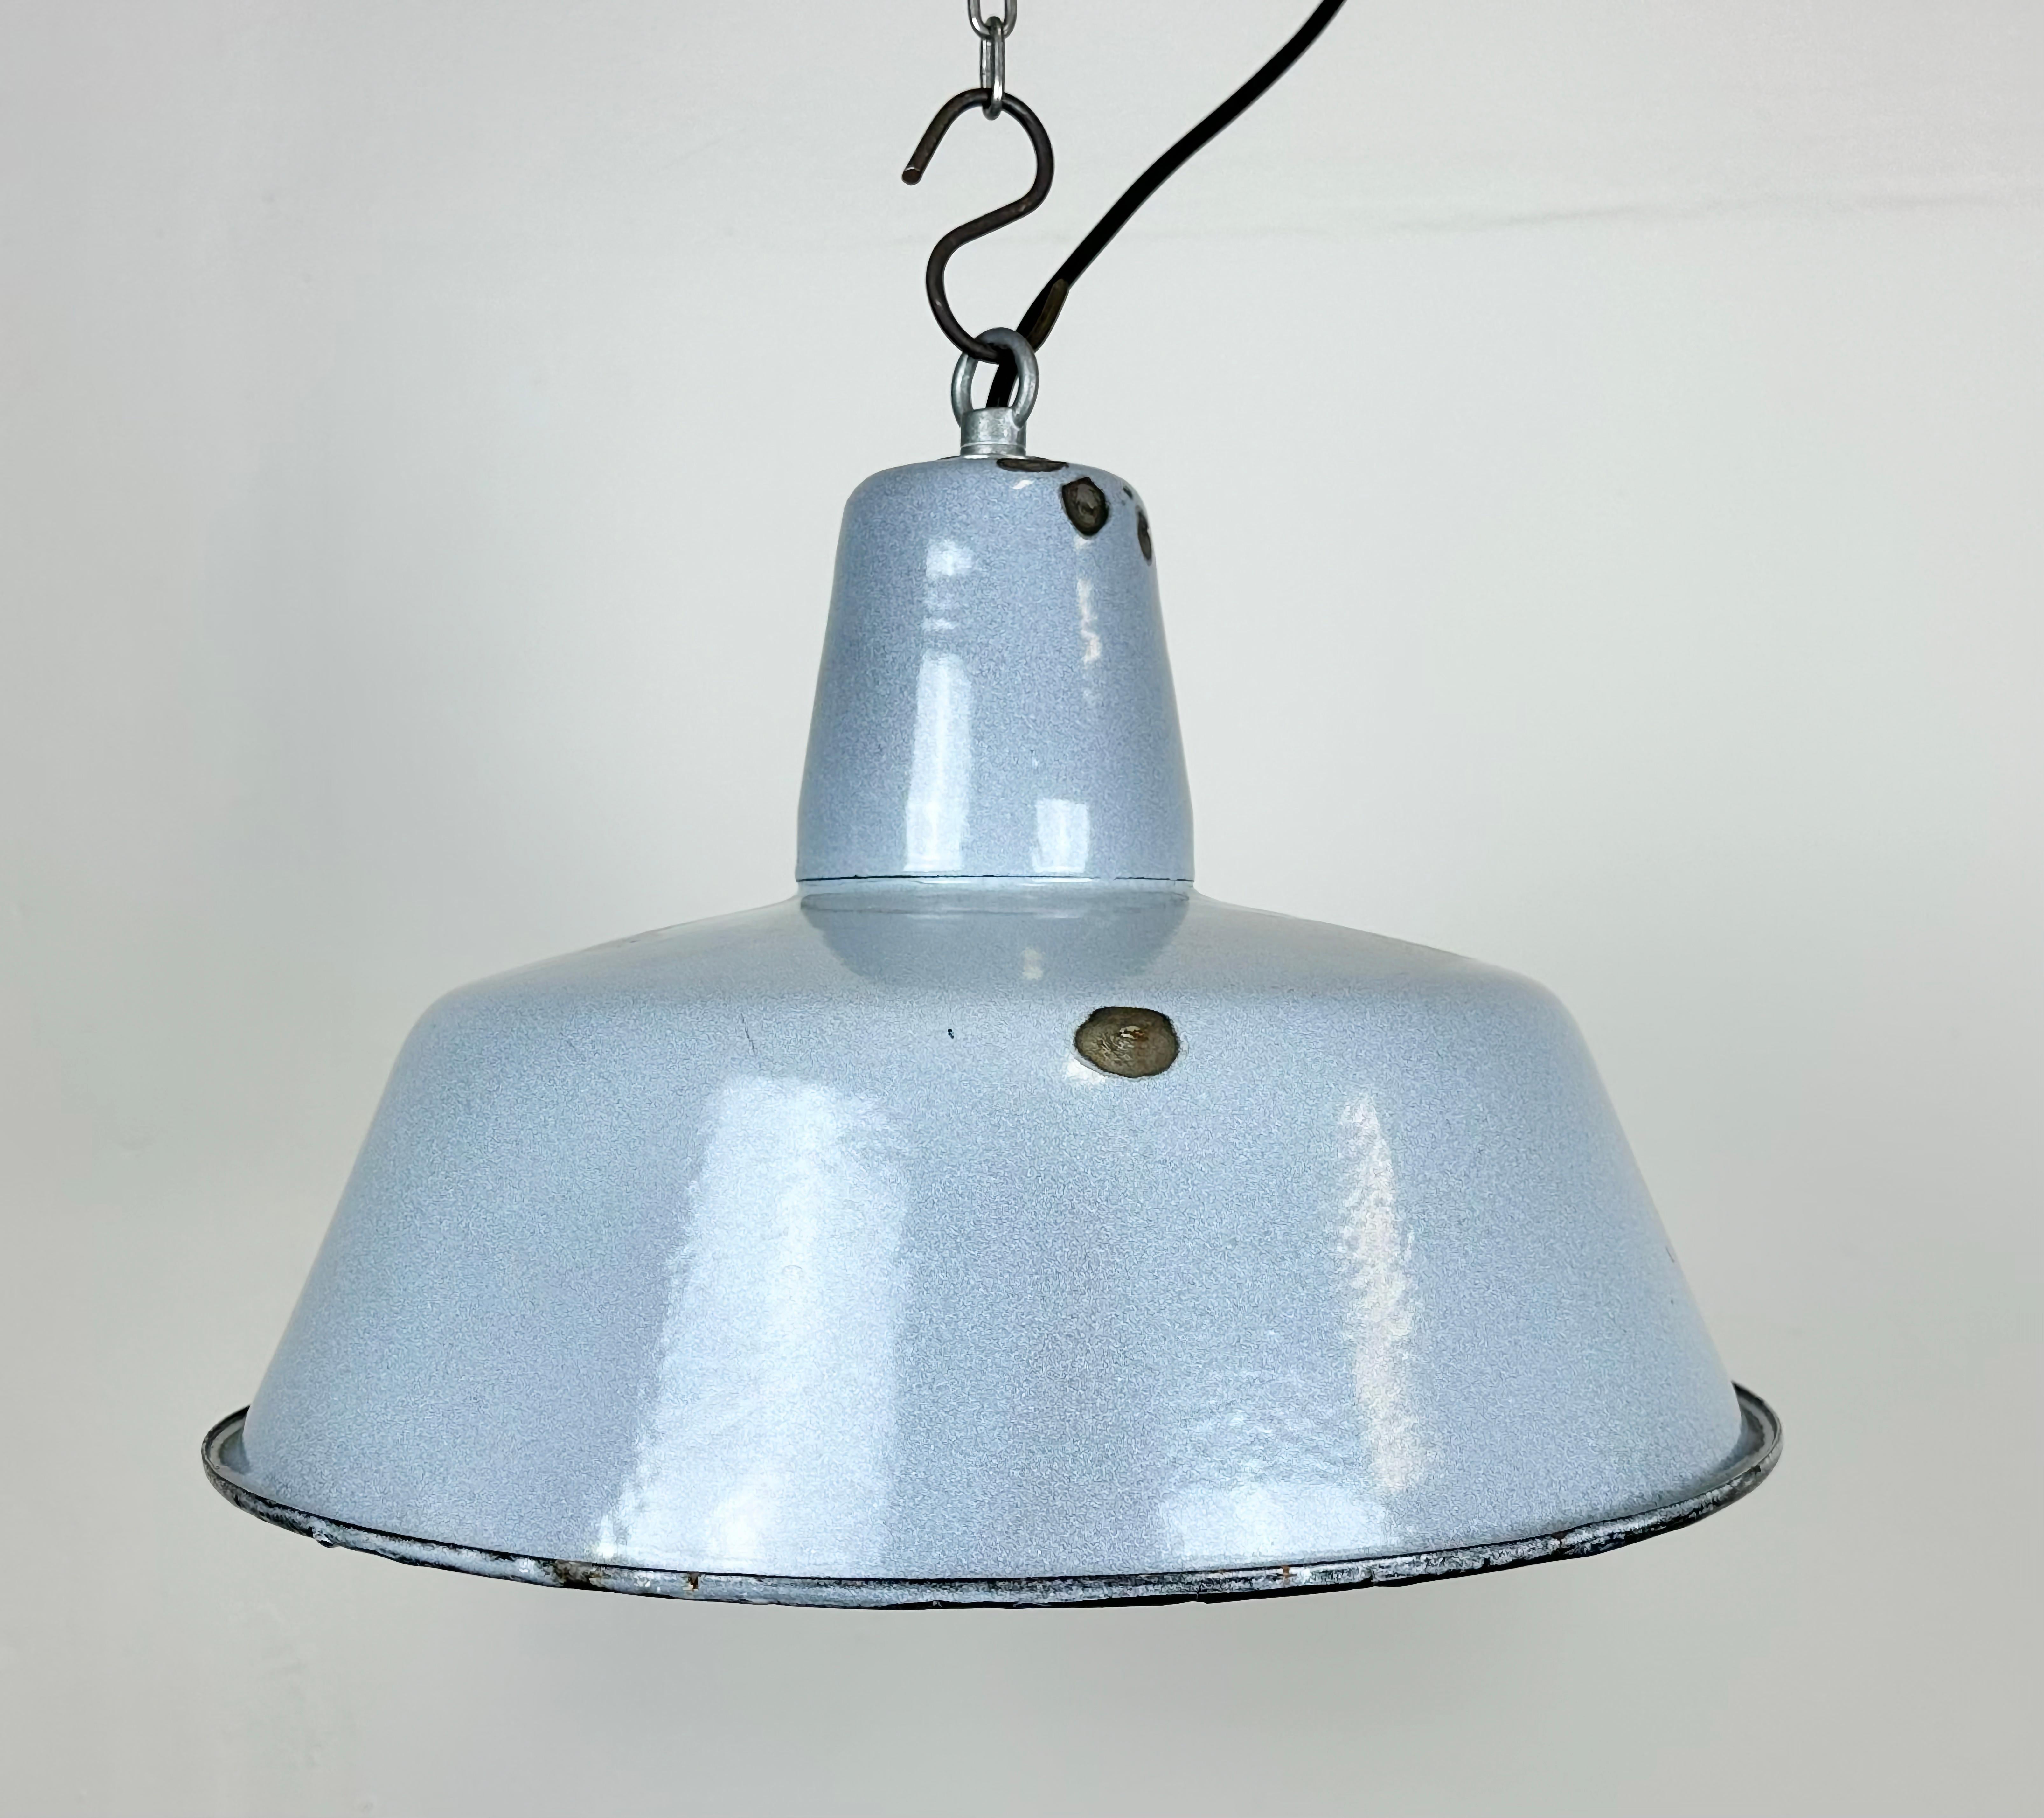 Industrial grey enamel pendant light made in Poland during the 1960s. White enamel inside the shade. Iron top. The porcelain socket requires E 27/ E 26 light bulbs. New wire. Fully functional. The weight of the lamp is 1,2 kg.